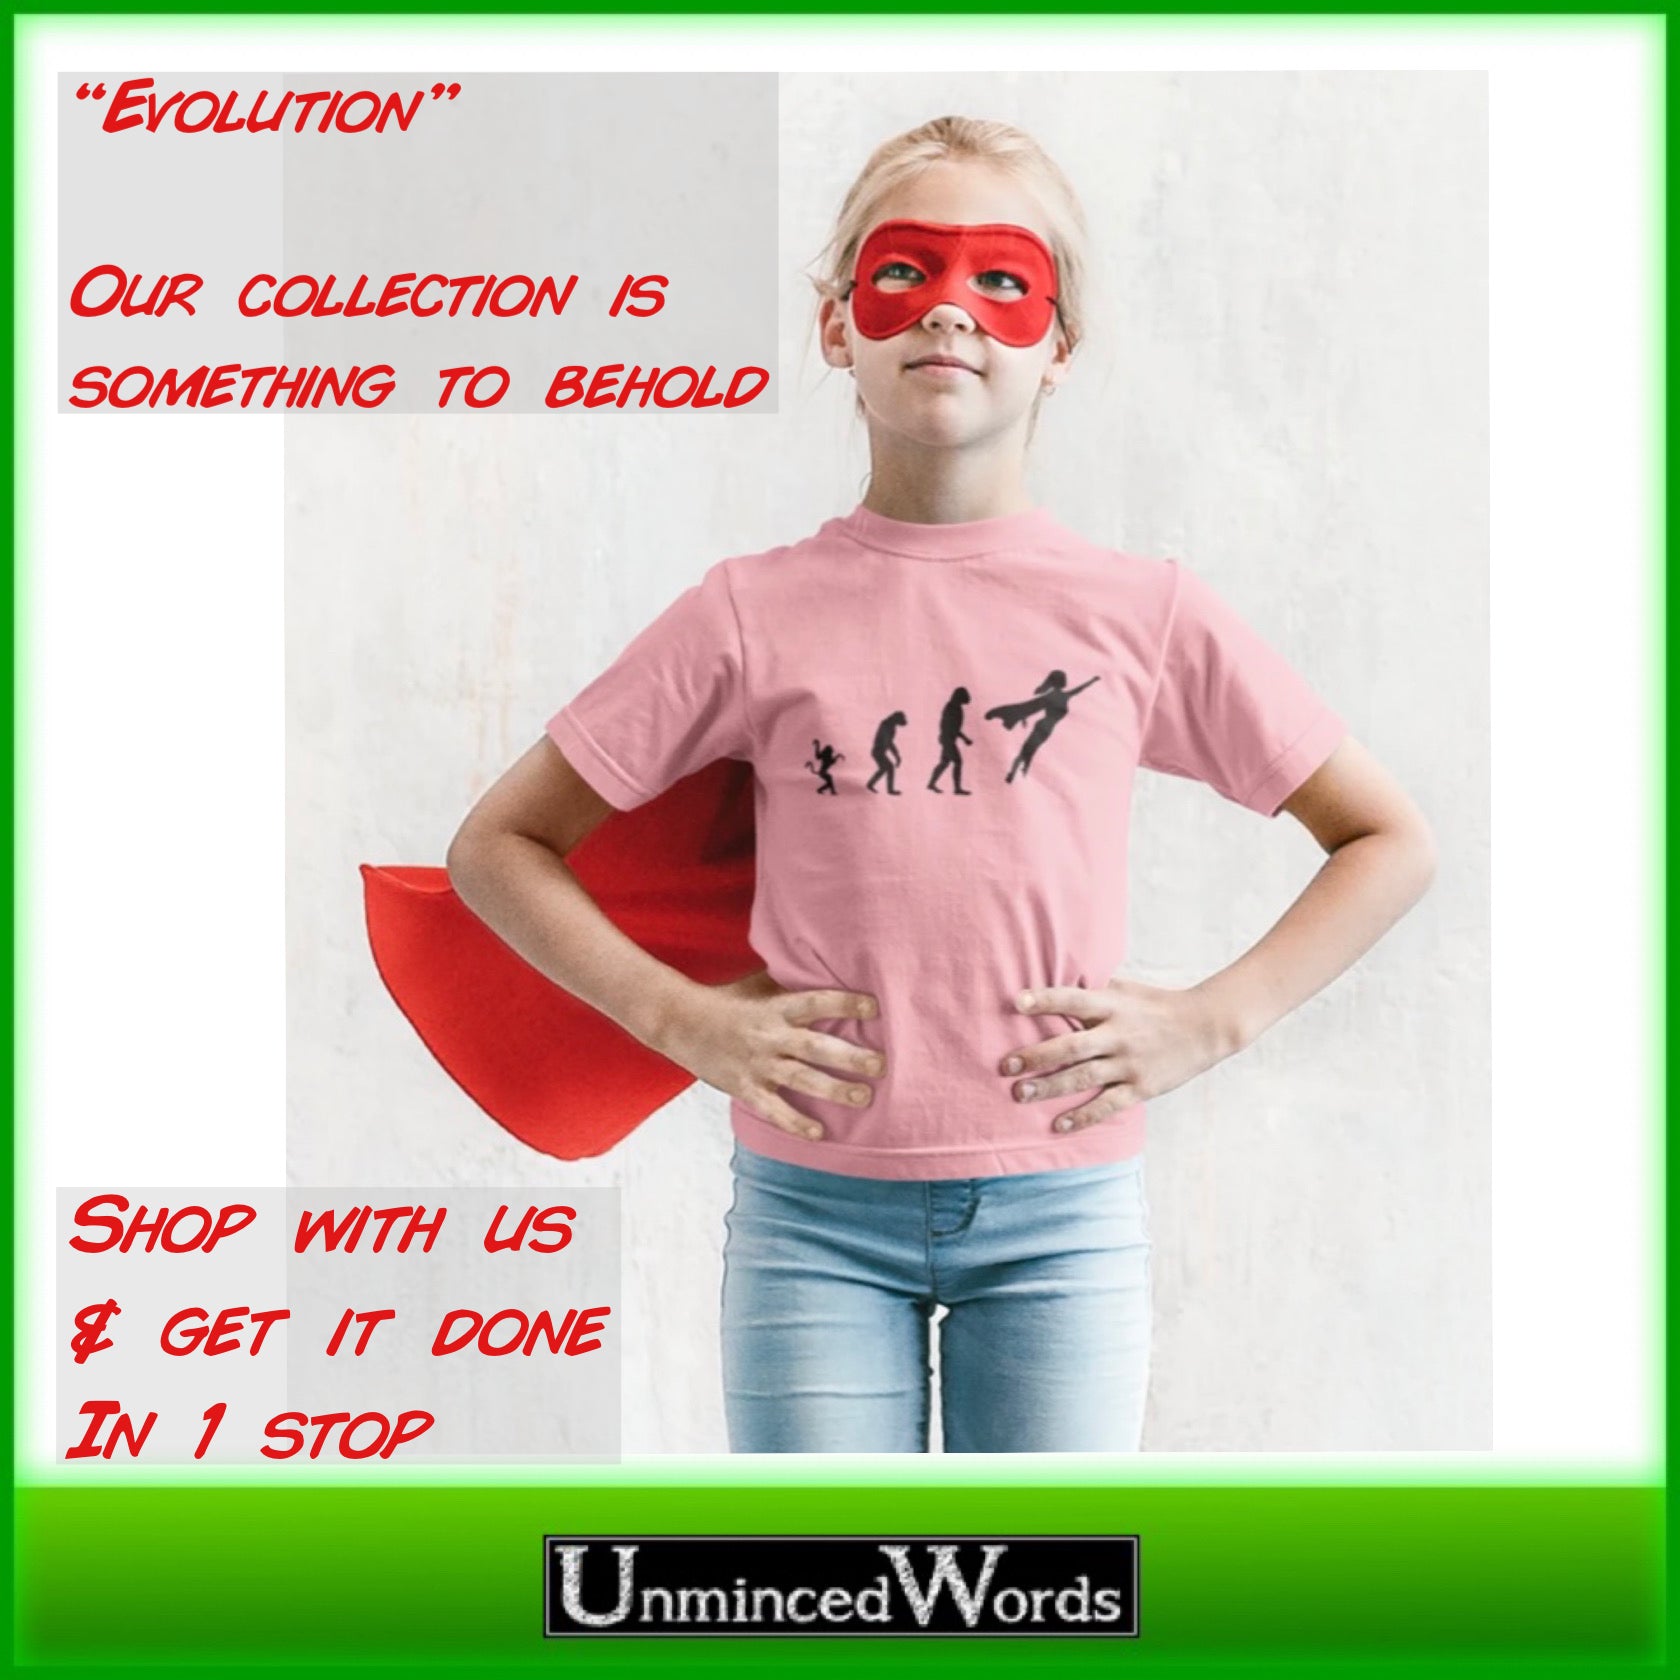 Our “Evolution” collection is something to behold